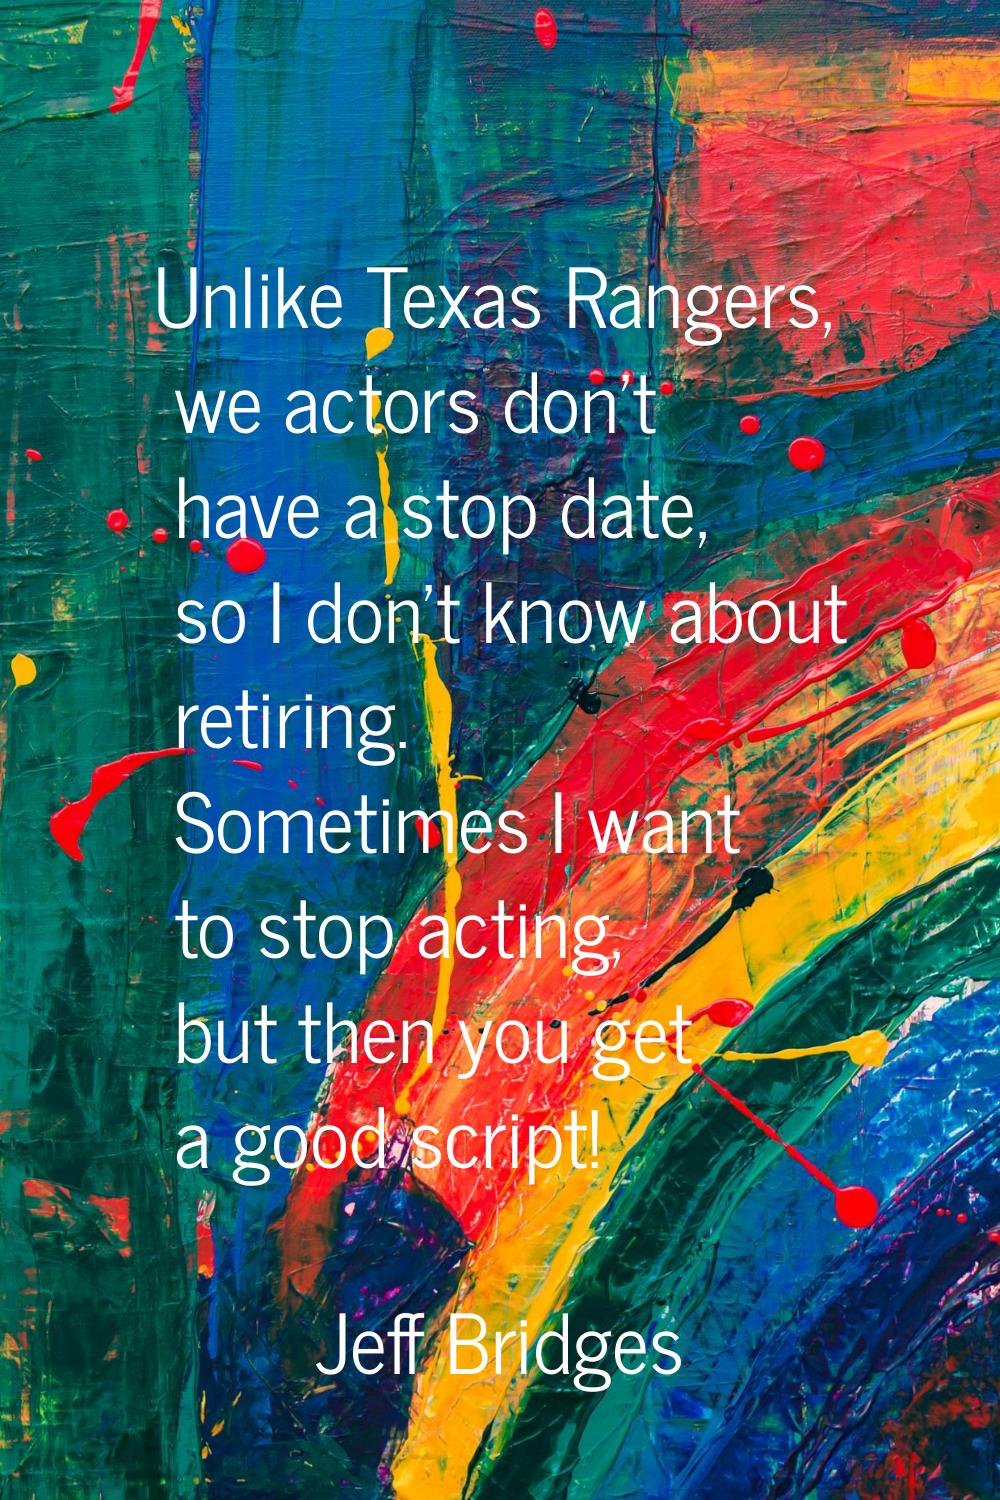 Unlike Texas Rangers, we actors don't have a stop date, so I don't know about retiring. Sometimes I